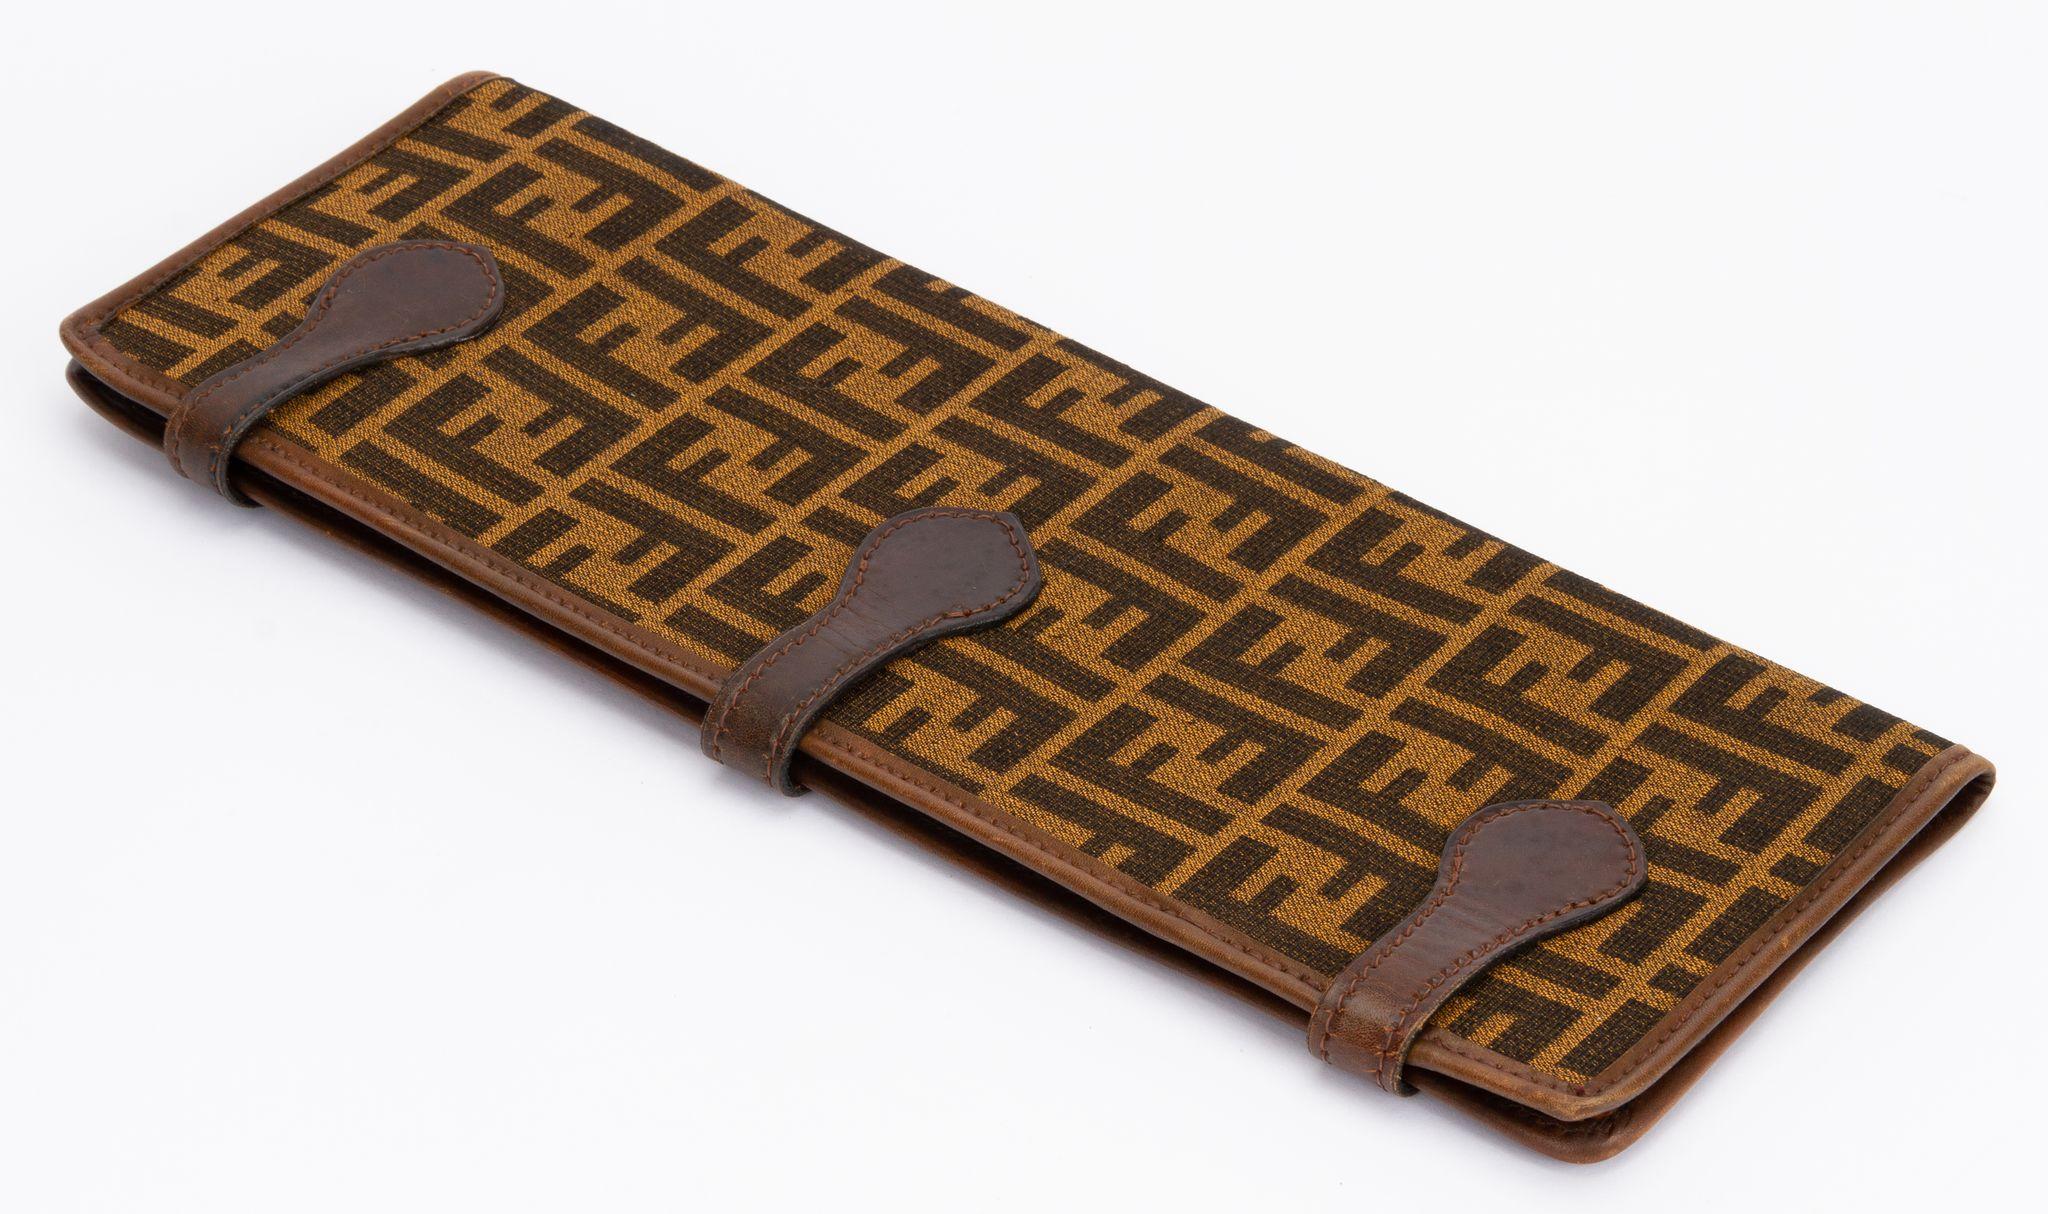 Fendi rare and collectible zucchino monogram ties carrying case.
